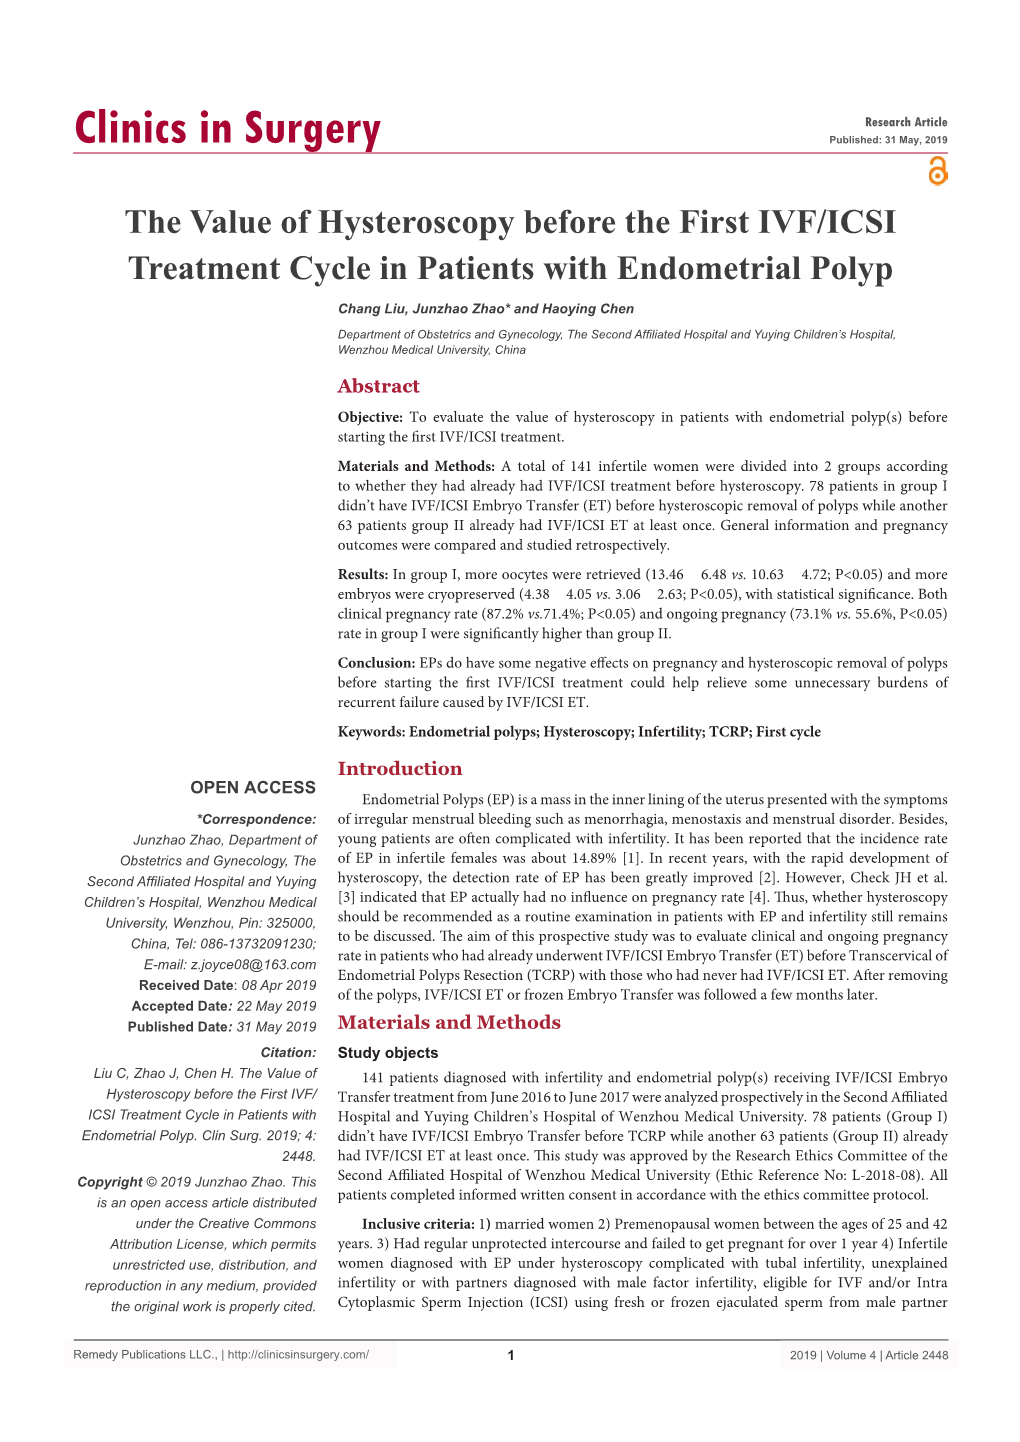 The Value of Hysteroscopy Before the First IVF/ICSI Treatment Cycle in Patients with Endometrial Polyp